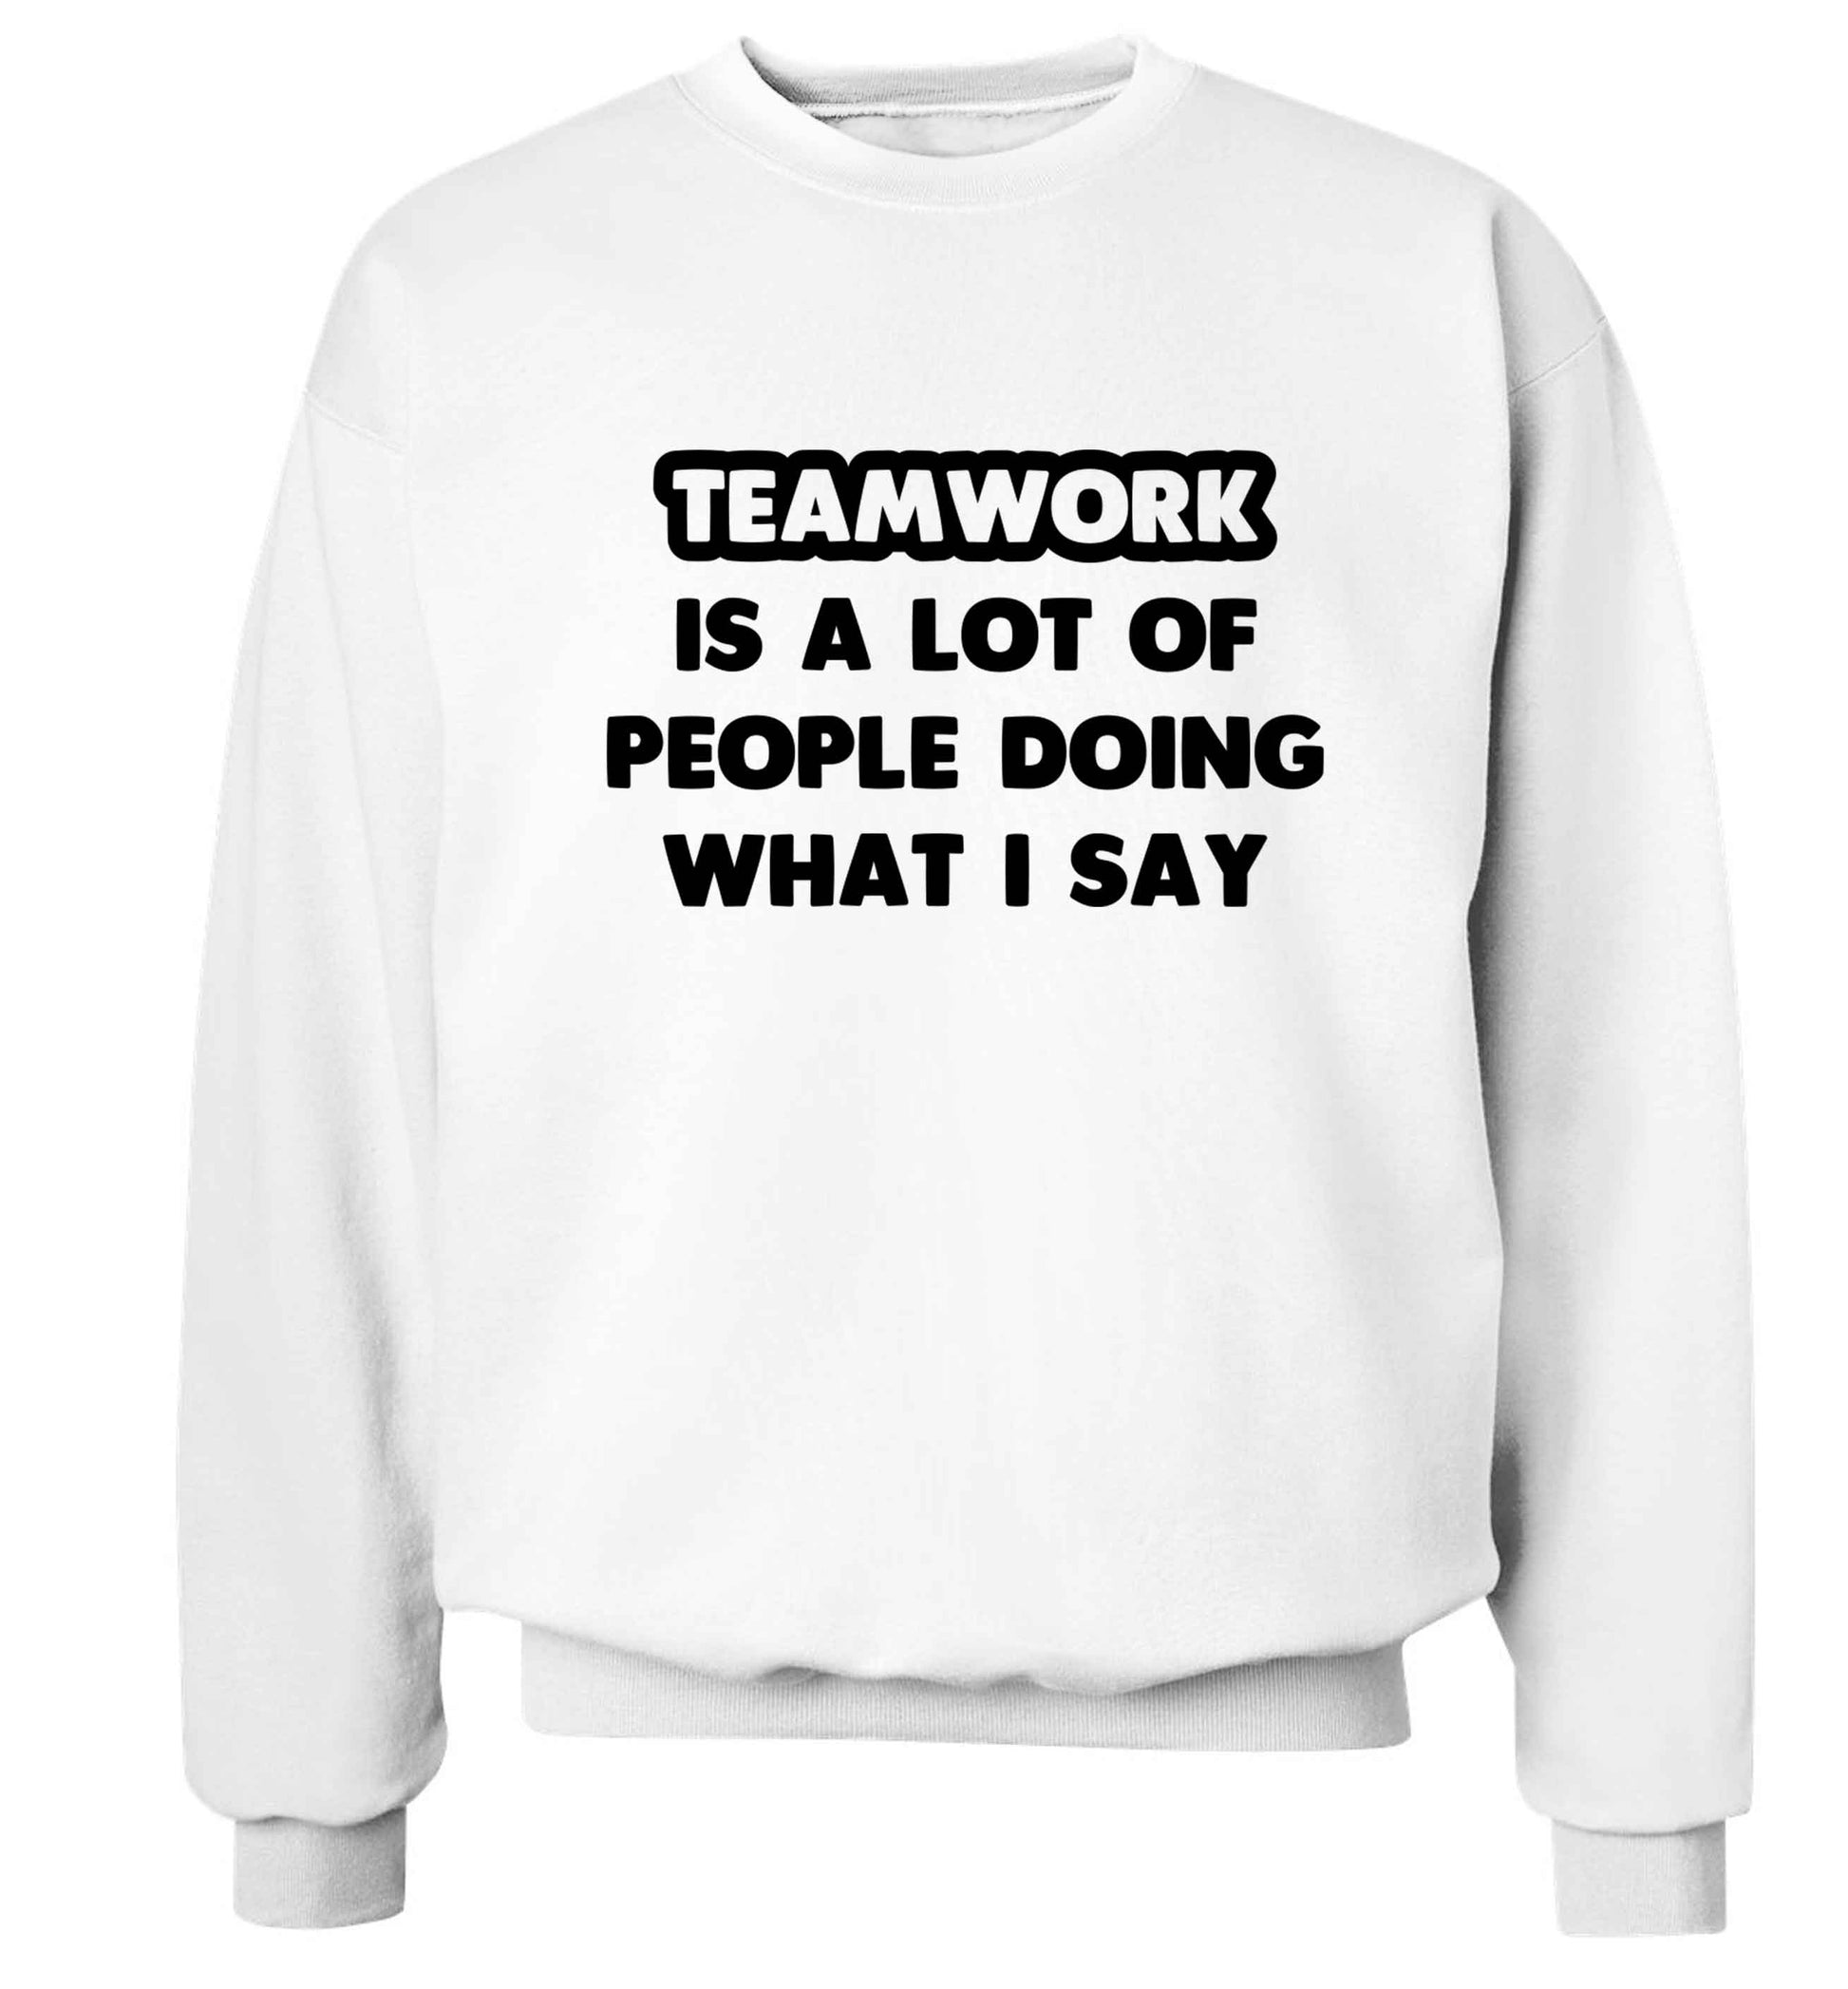 Teamwork is a lot of people doing what I say Adult's unisex white Sweater 2XL